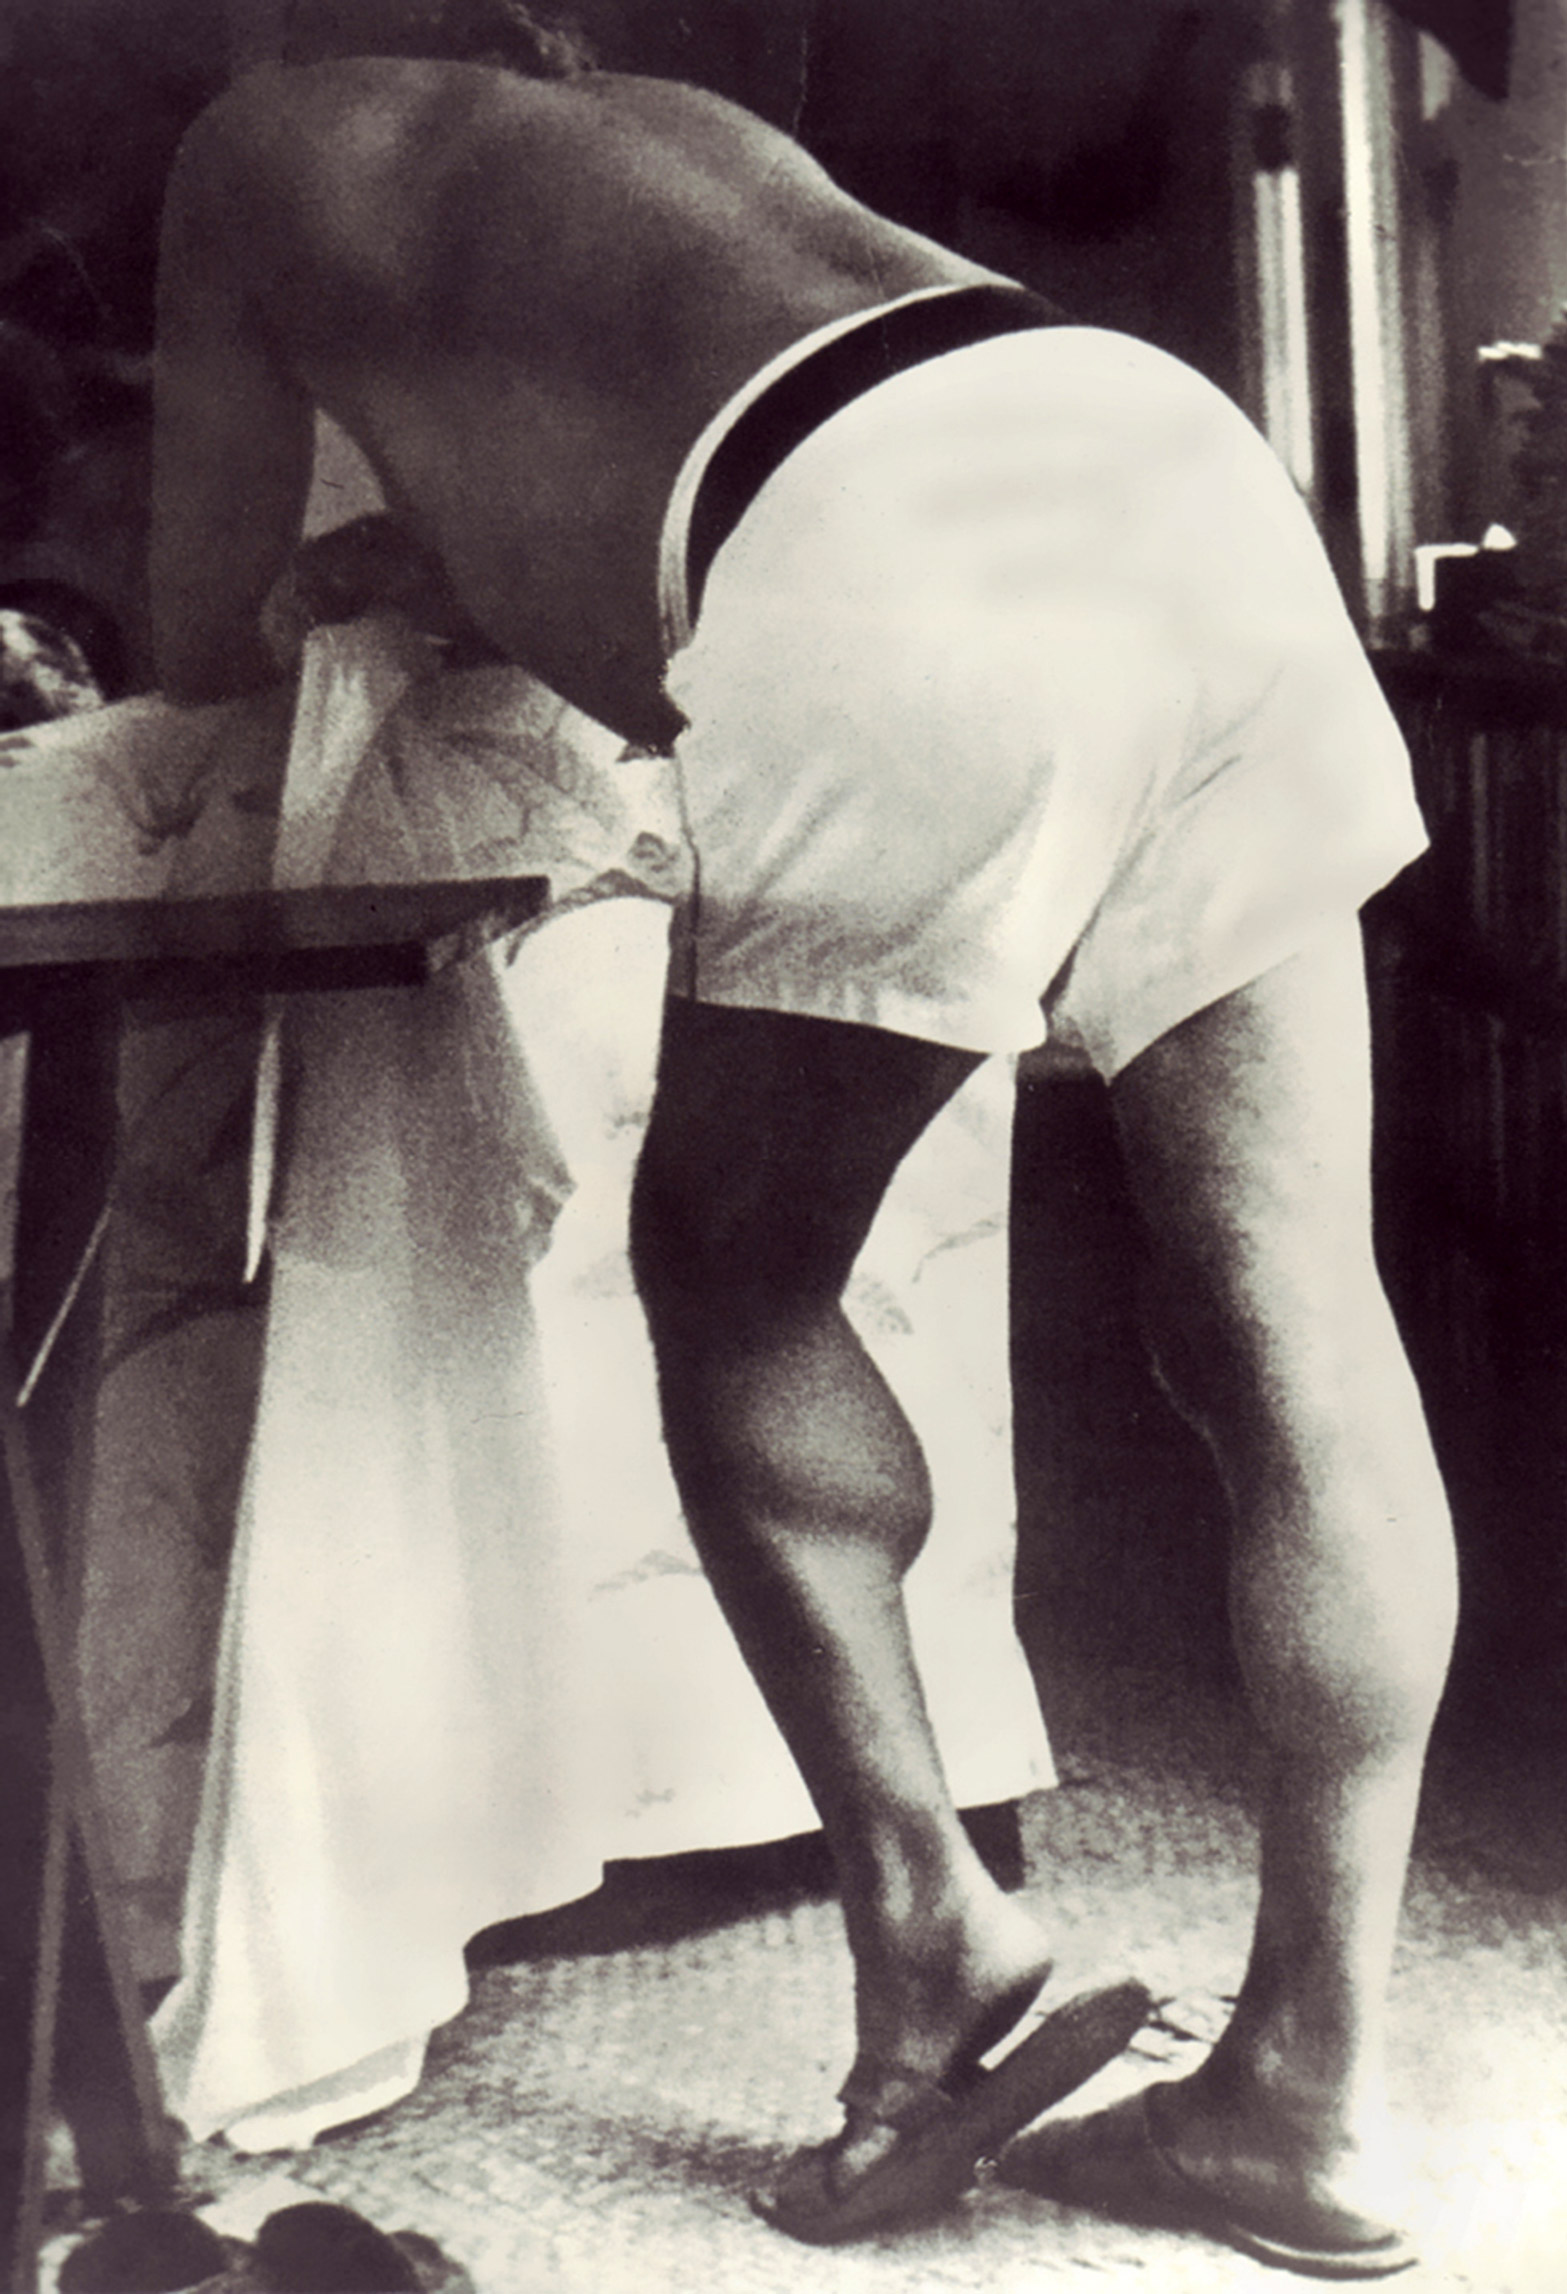 A photograph of Ernest Hemingway which shows him writing while standing up. 